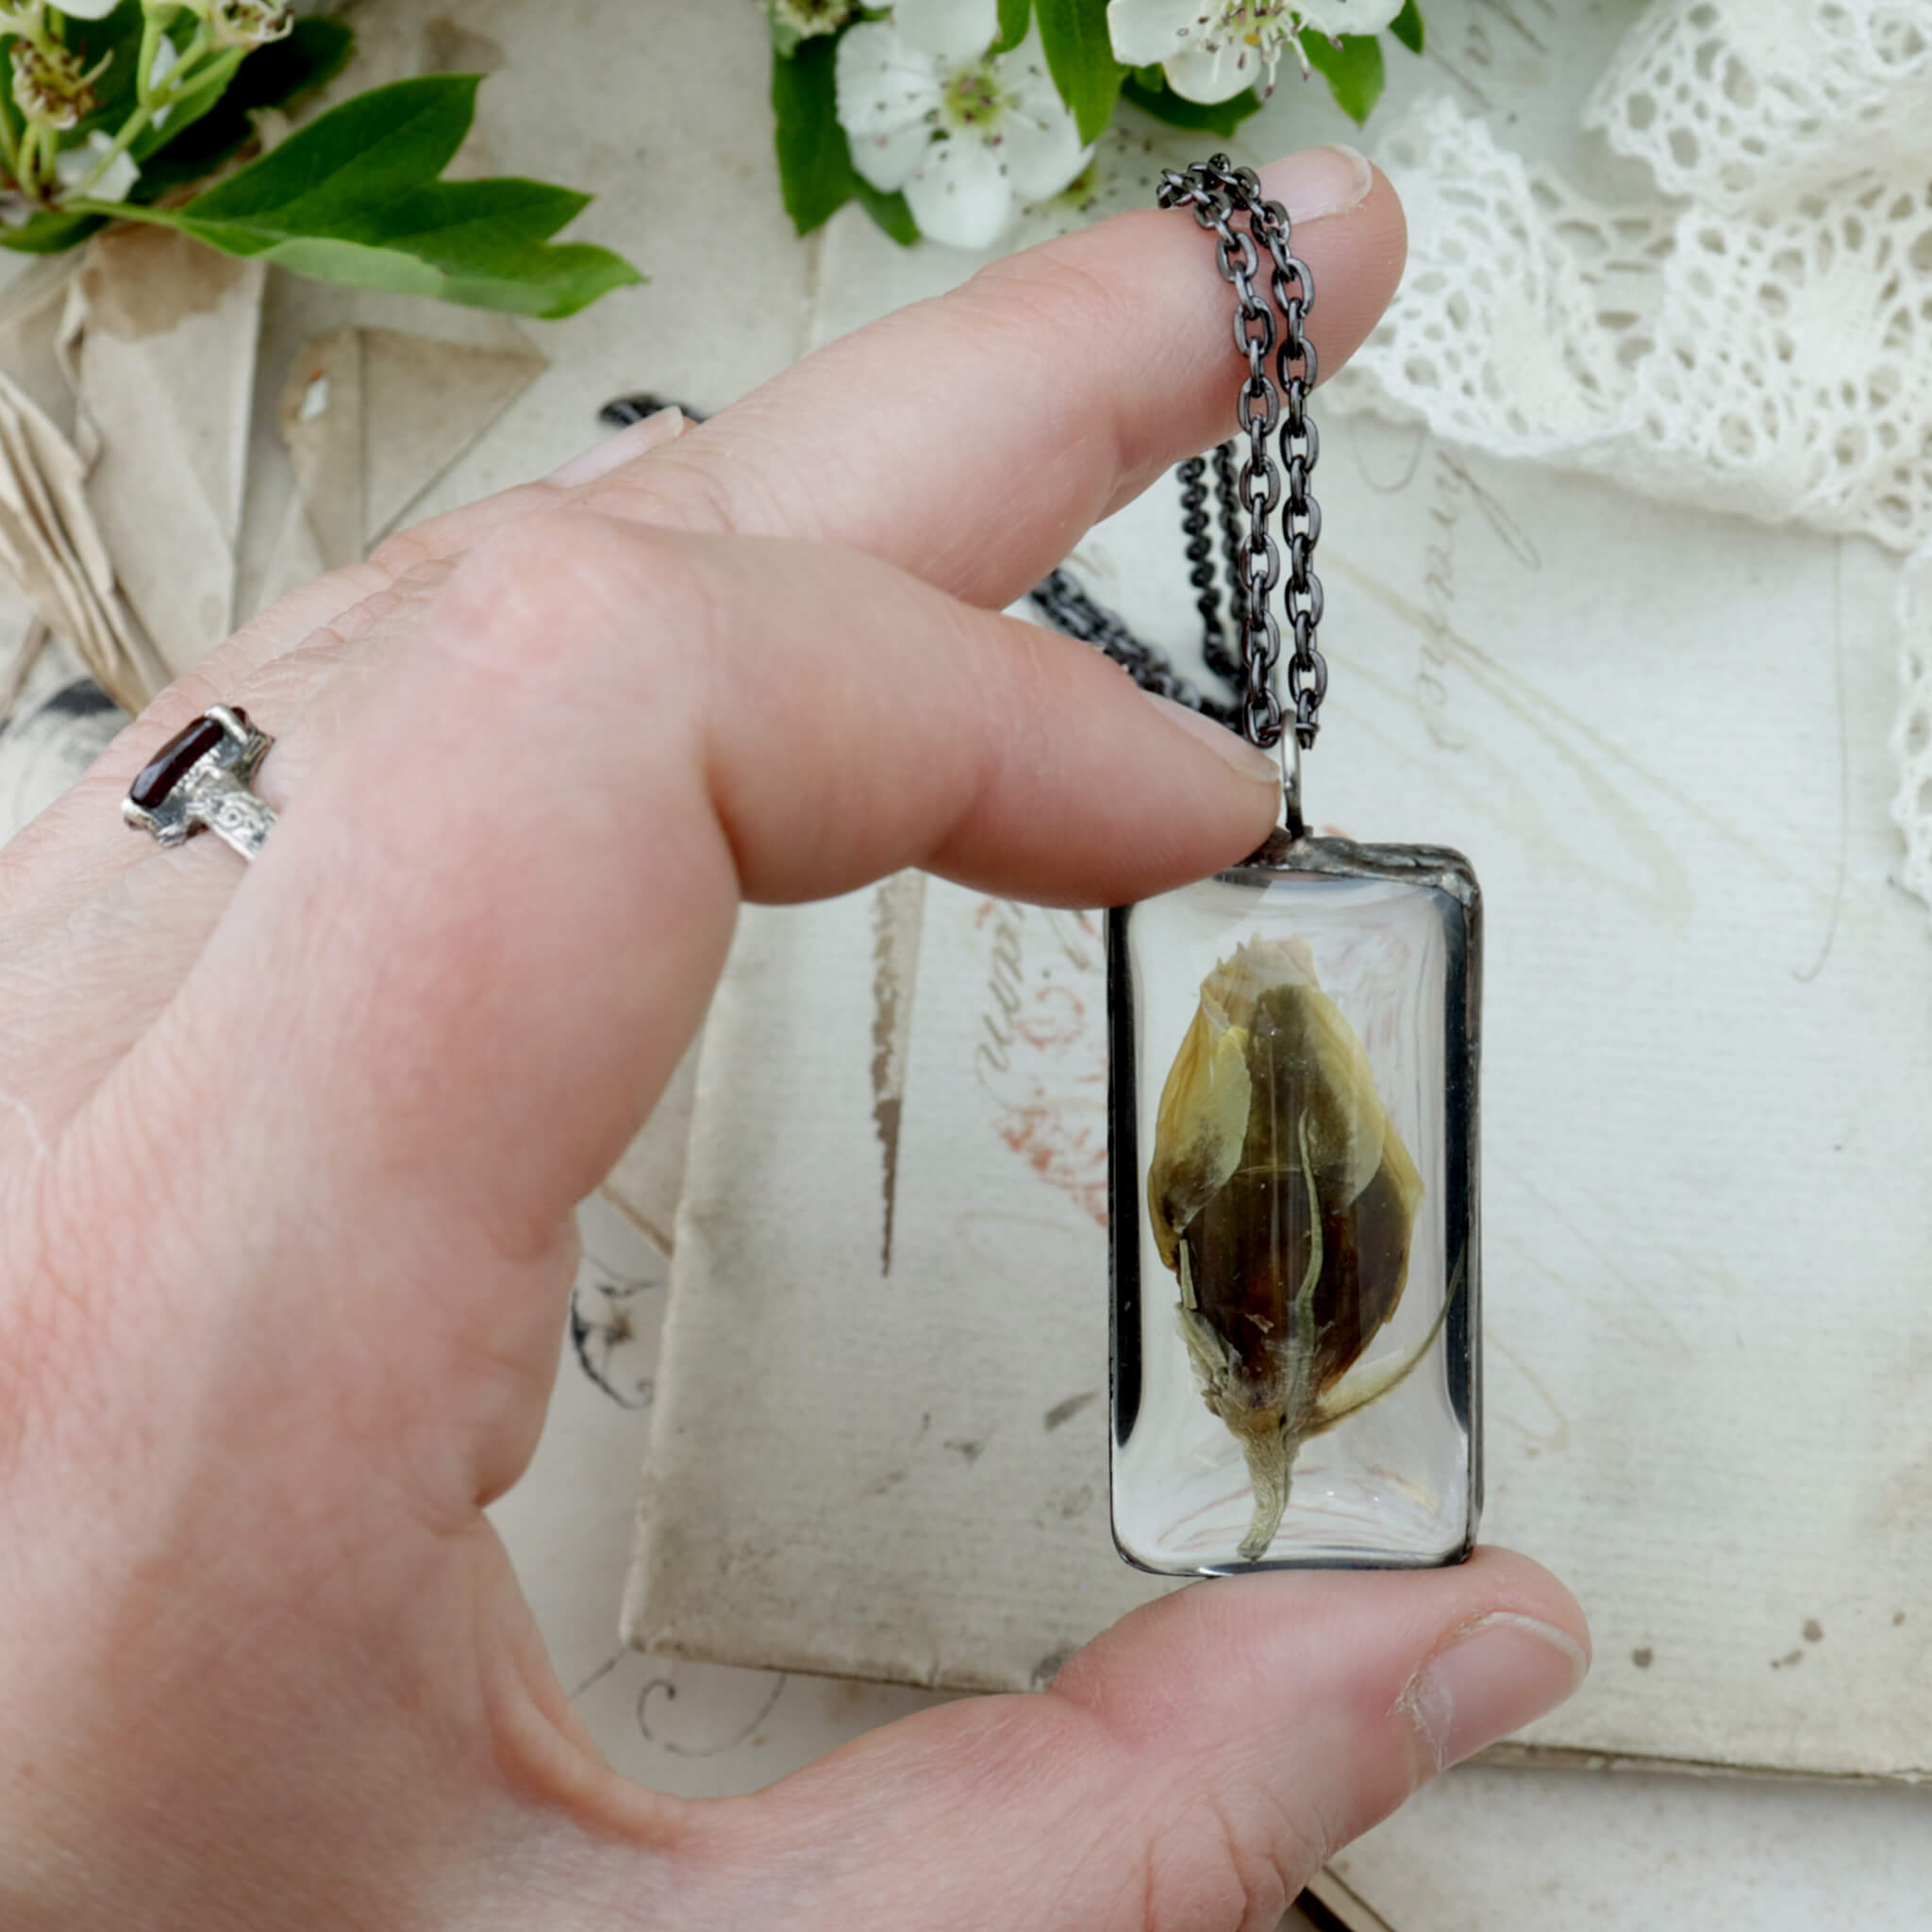 Hand holding a pendant necklace with Eustoma flower bud framed in stained glass